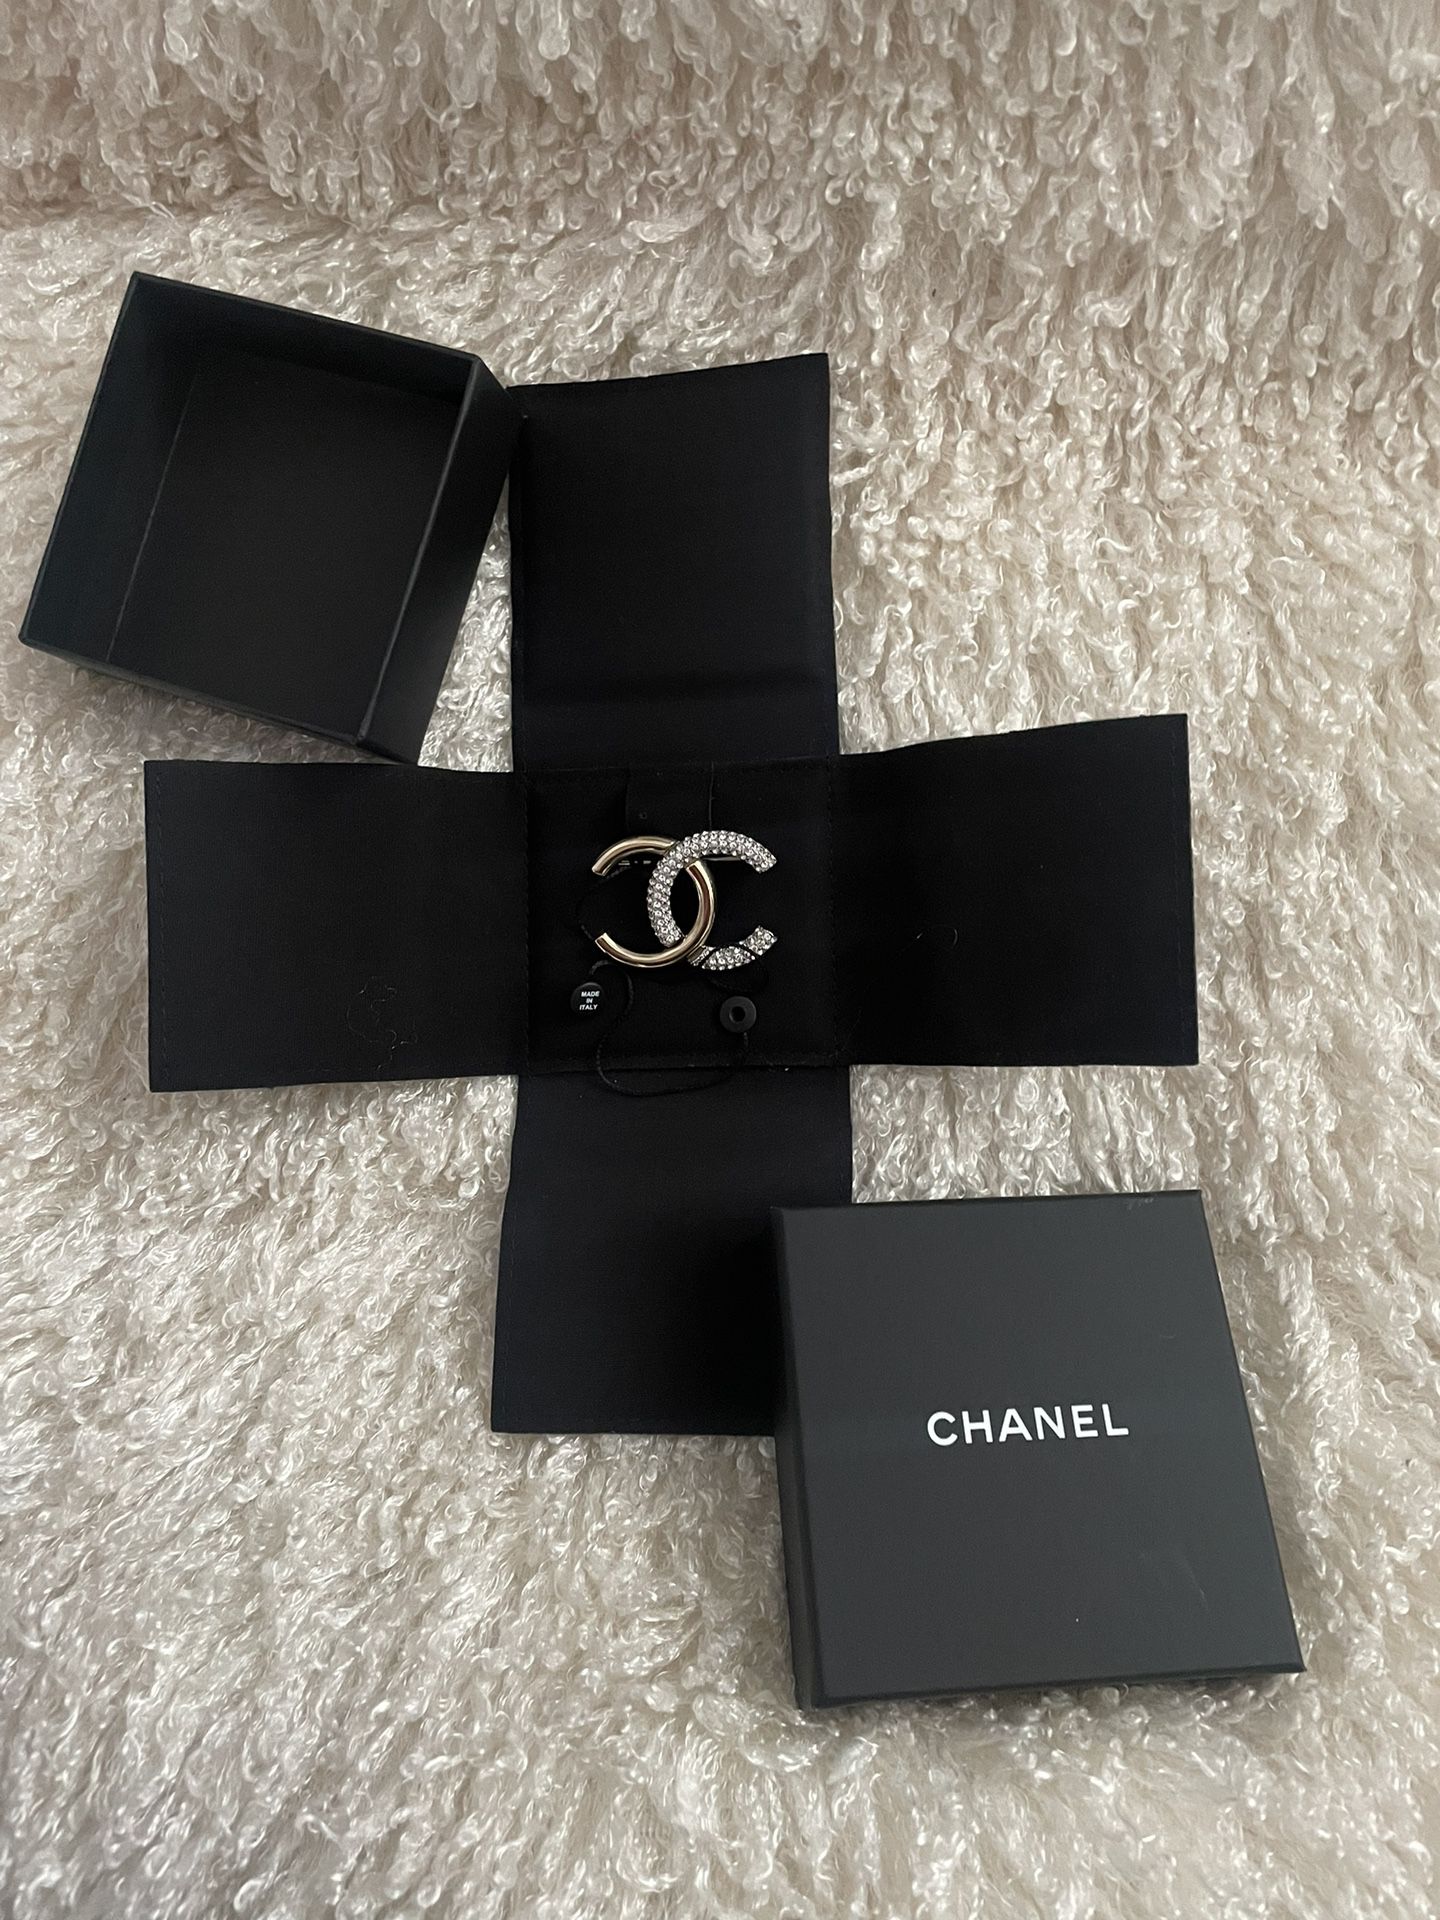 Original Chanel Bag Or Clothes Pin for Sale in El Paso, TX - OfferUp